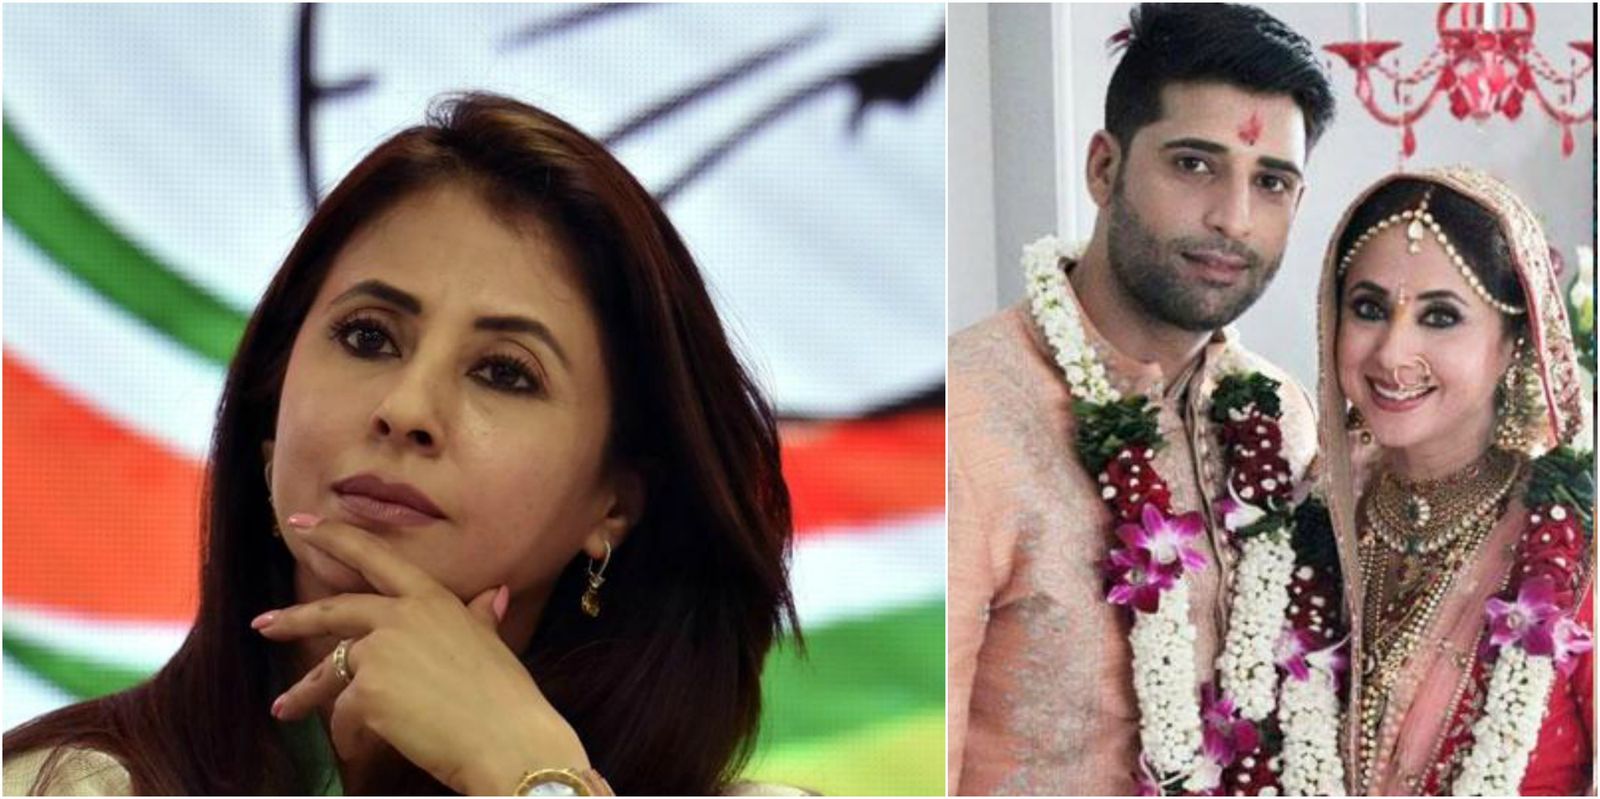 Urmila Matondkar Talks About Revoking Article 370 In Kashmir, Says Can’t Contact In-Laws Staying In The Valley